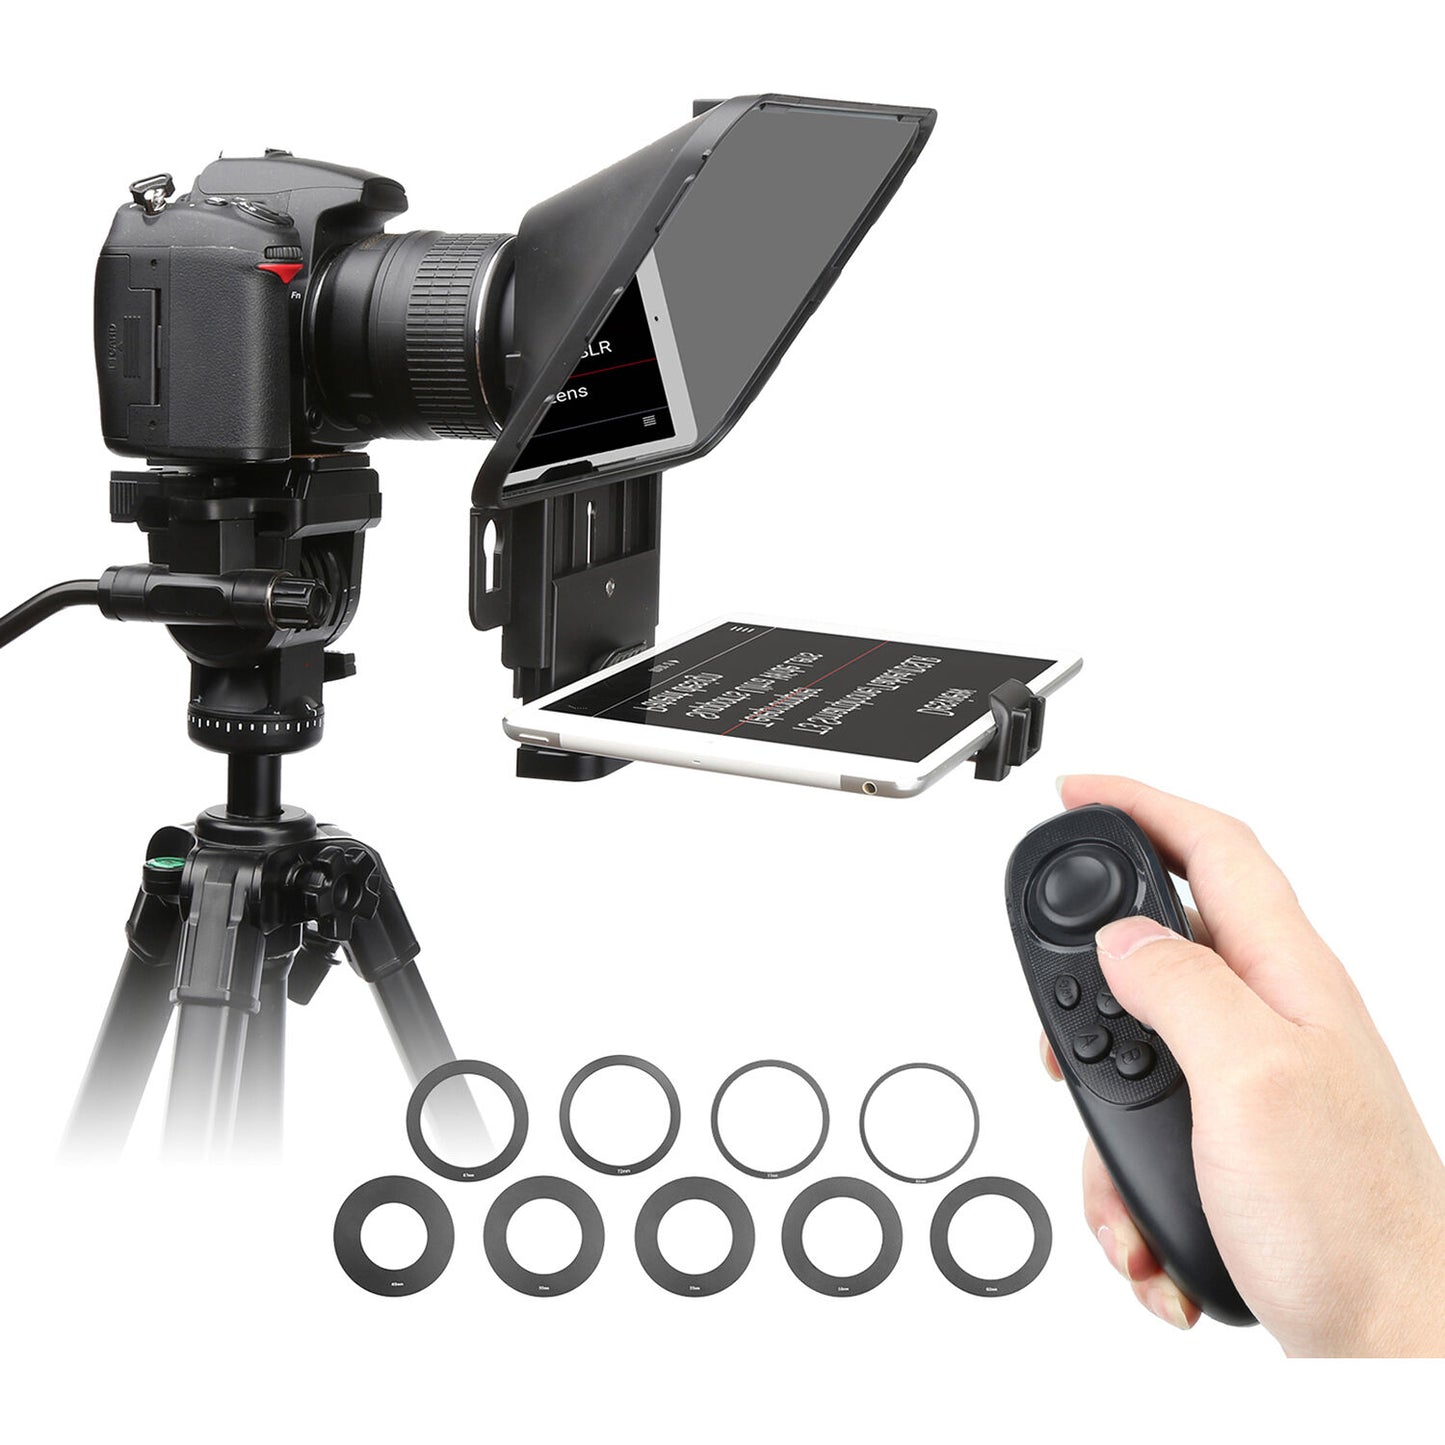 SmallRig x Desview TP10 Portable Teleprompter with Ultra Wide Lens Support Adapter Wireless Remote for Tablet Smartphone DSLR 3374